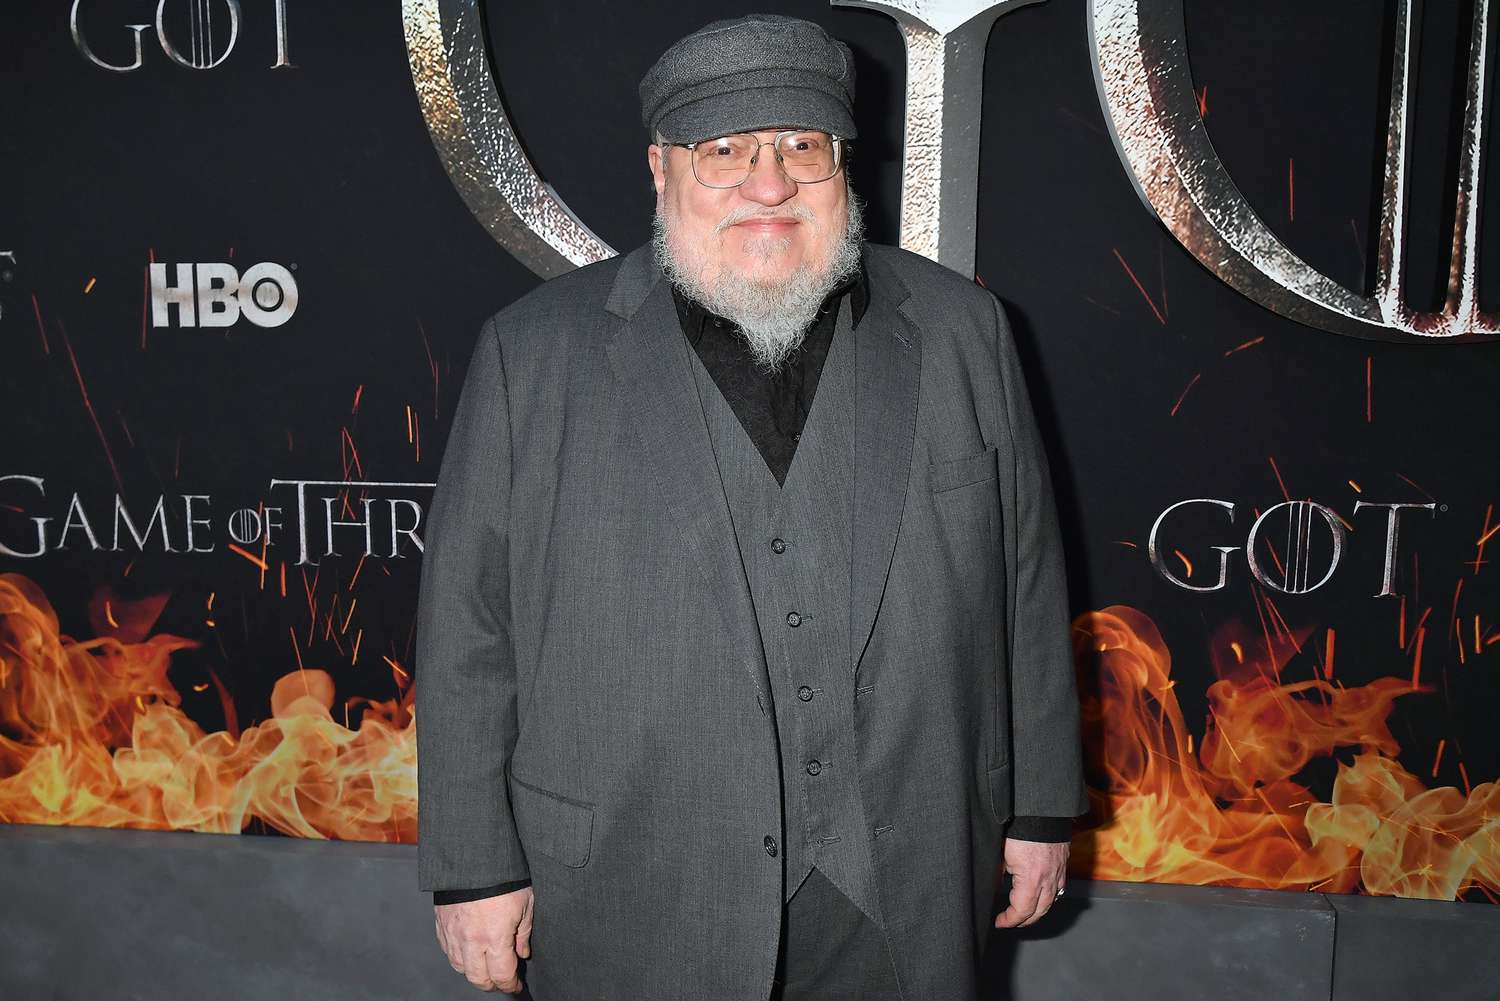 "Game Of Thrones" Creator George R. R. Martin attends the "Game Of Thrones" Season 8 NY Premiere on April 3, 2019 in New York City.